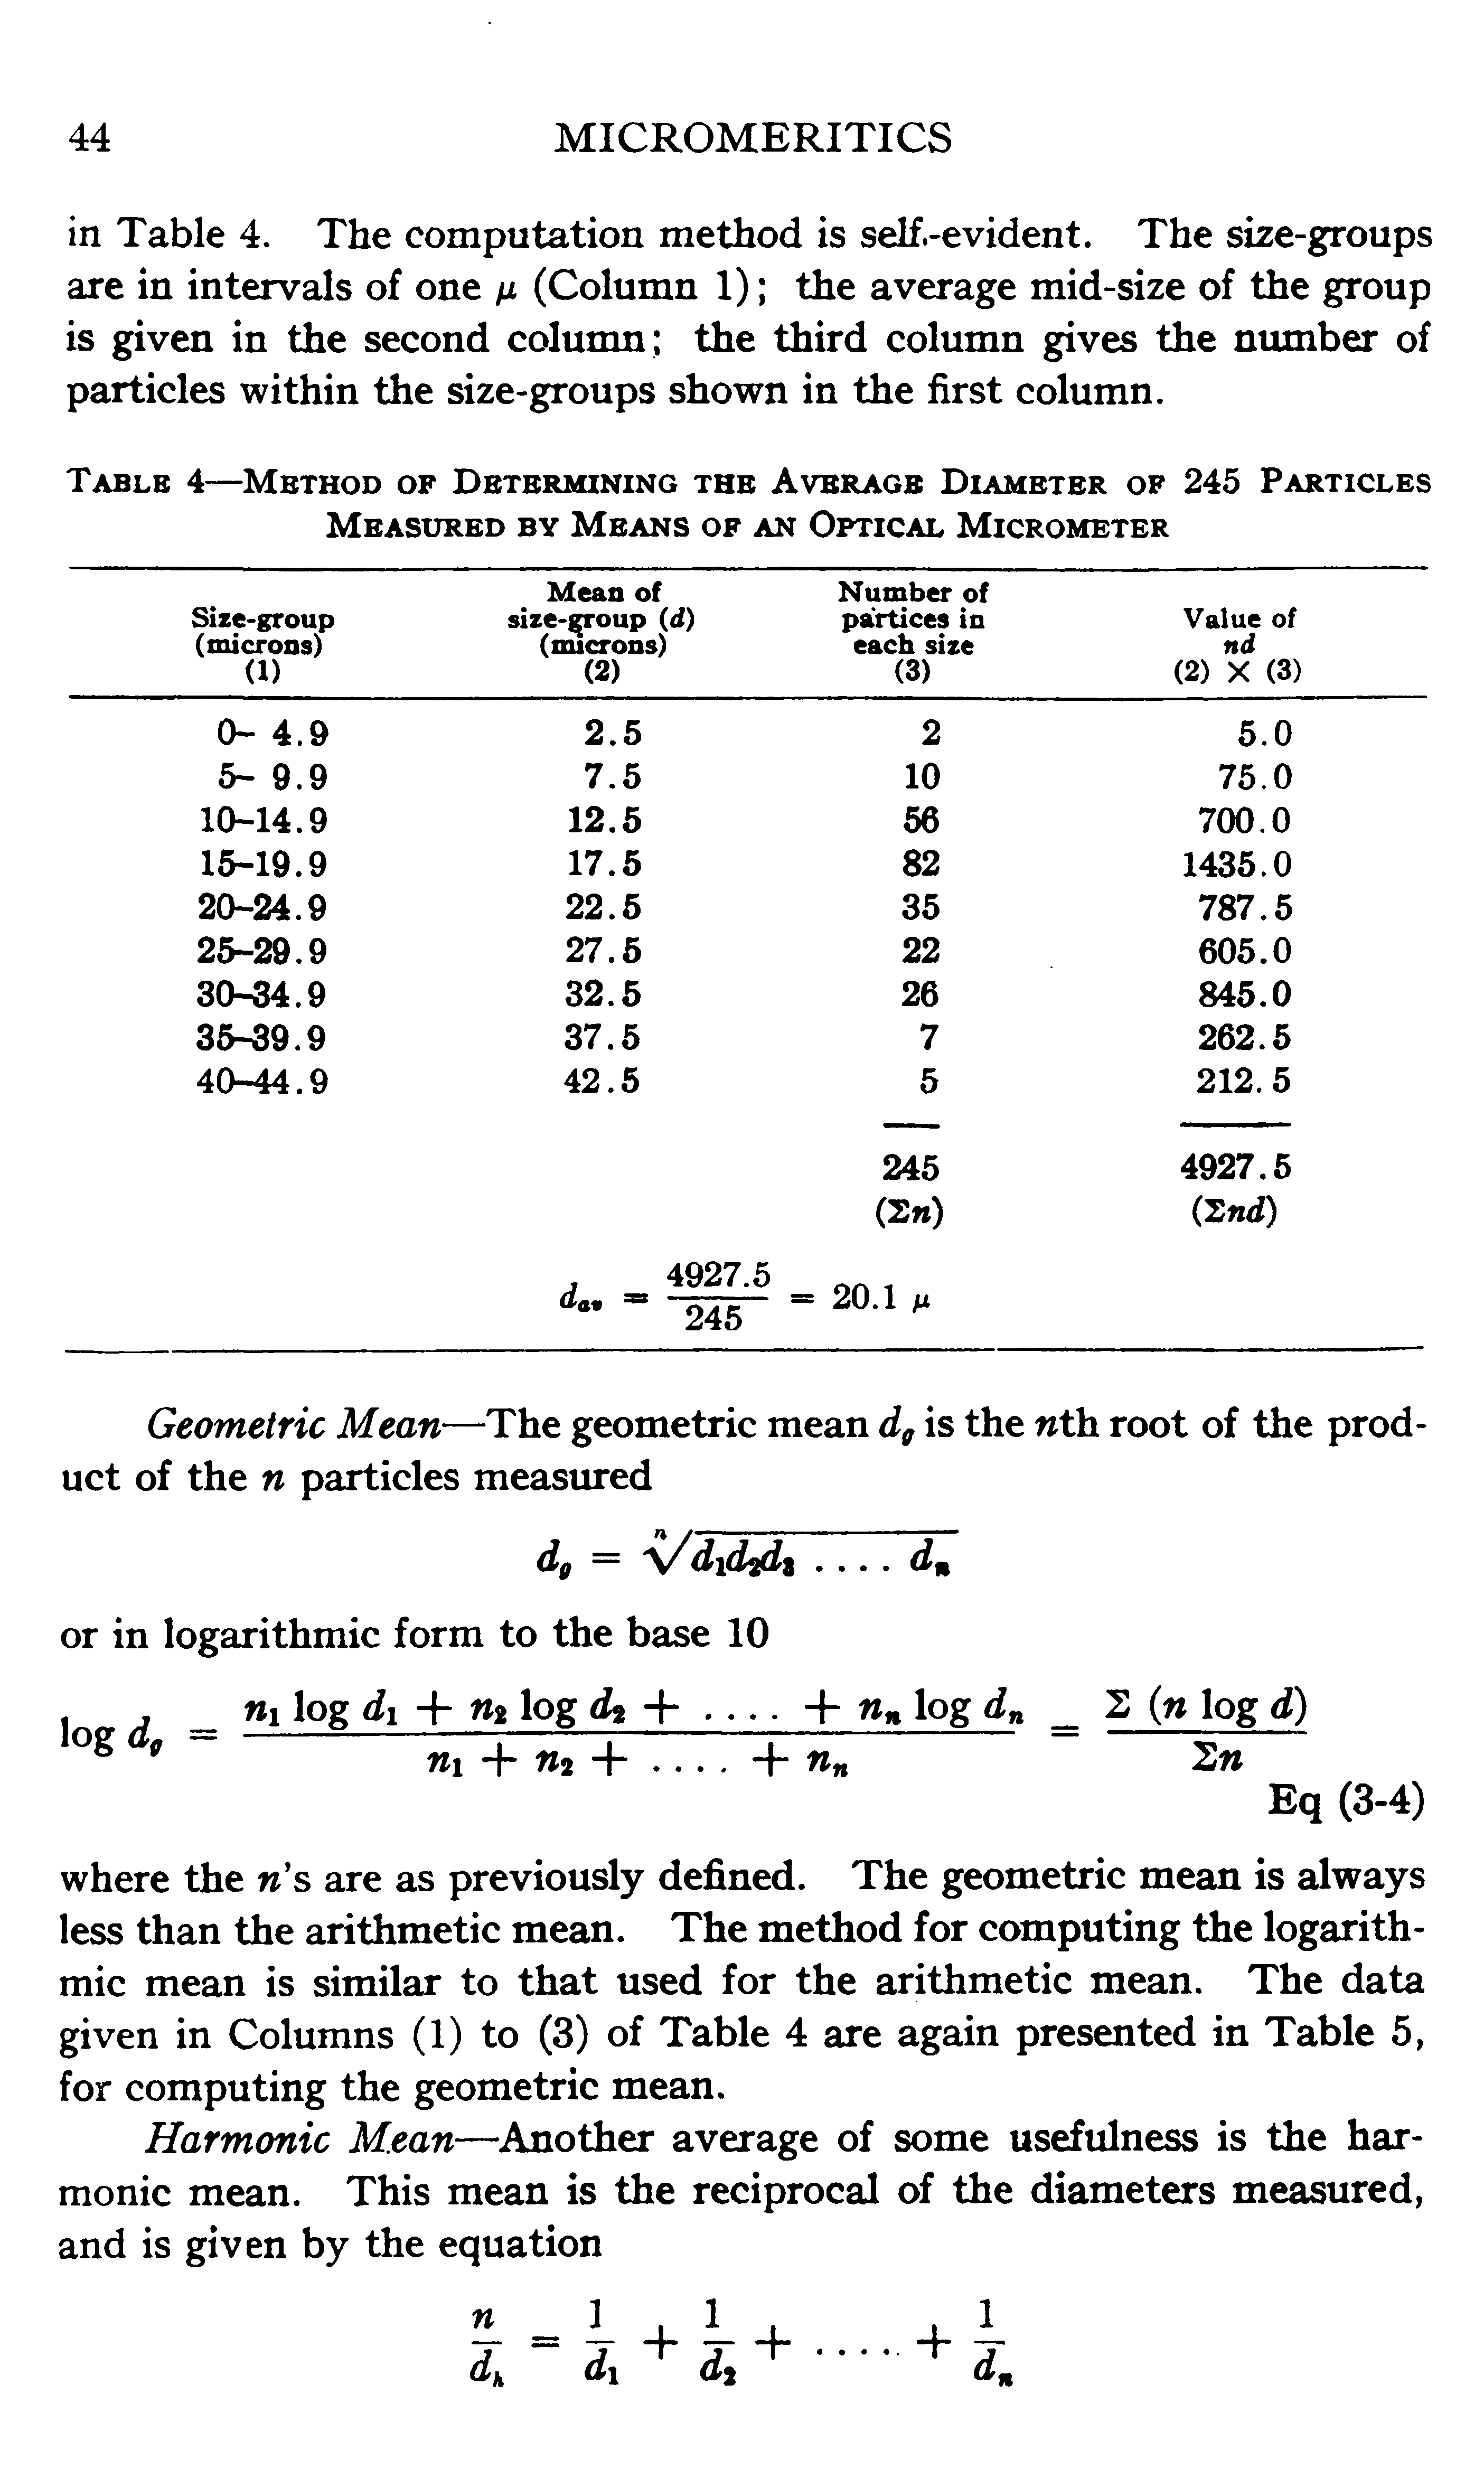 Table 4—Method of Determining the Average Diameter of 245 Particles Measured by Means of an Optical Micrometer...